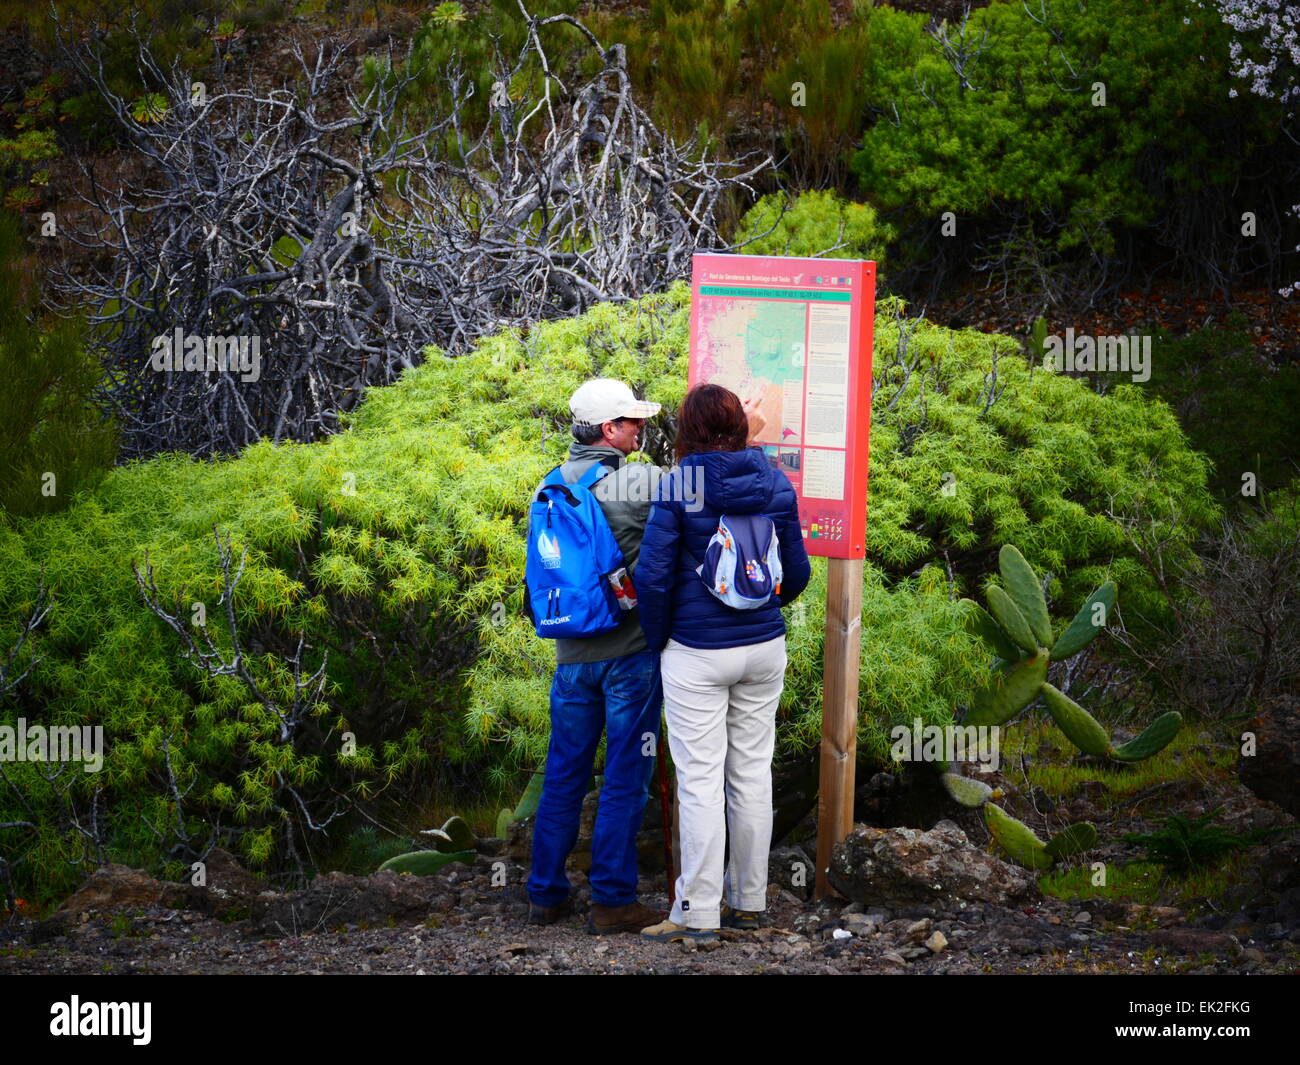 Tourists looking at Trekking information board in North Tenerife island Canary islands Spain Stock Photo